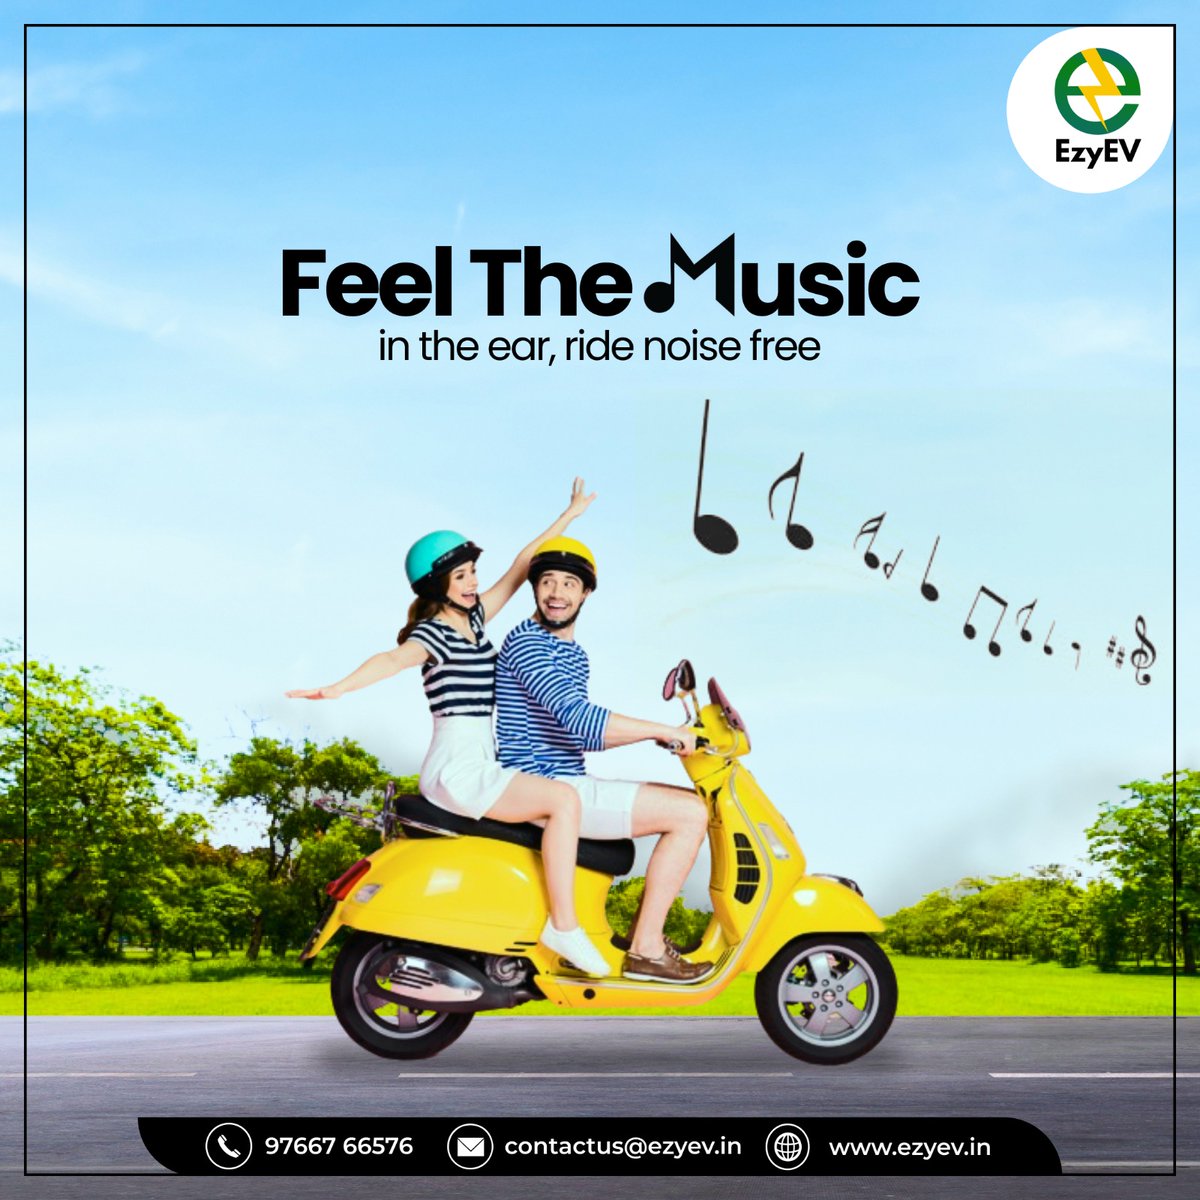 🎵EzyEV: Feel The Music 🎶

In the ear, ride noise-free!

Experience the rhythm of electric mobility with EzyEV!

#EzyEV #ElectricMobility #NoiseFreeRide #SustainableTransport #FeelTheMusic #GreenEnergy #ZeroEmissions #FutureOfMobility #RideElectric #EnvironmentallyFriendly